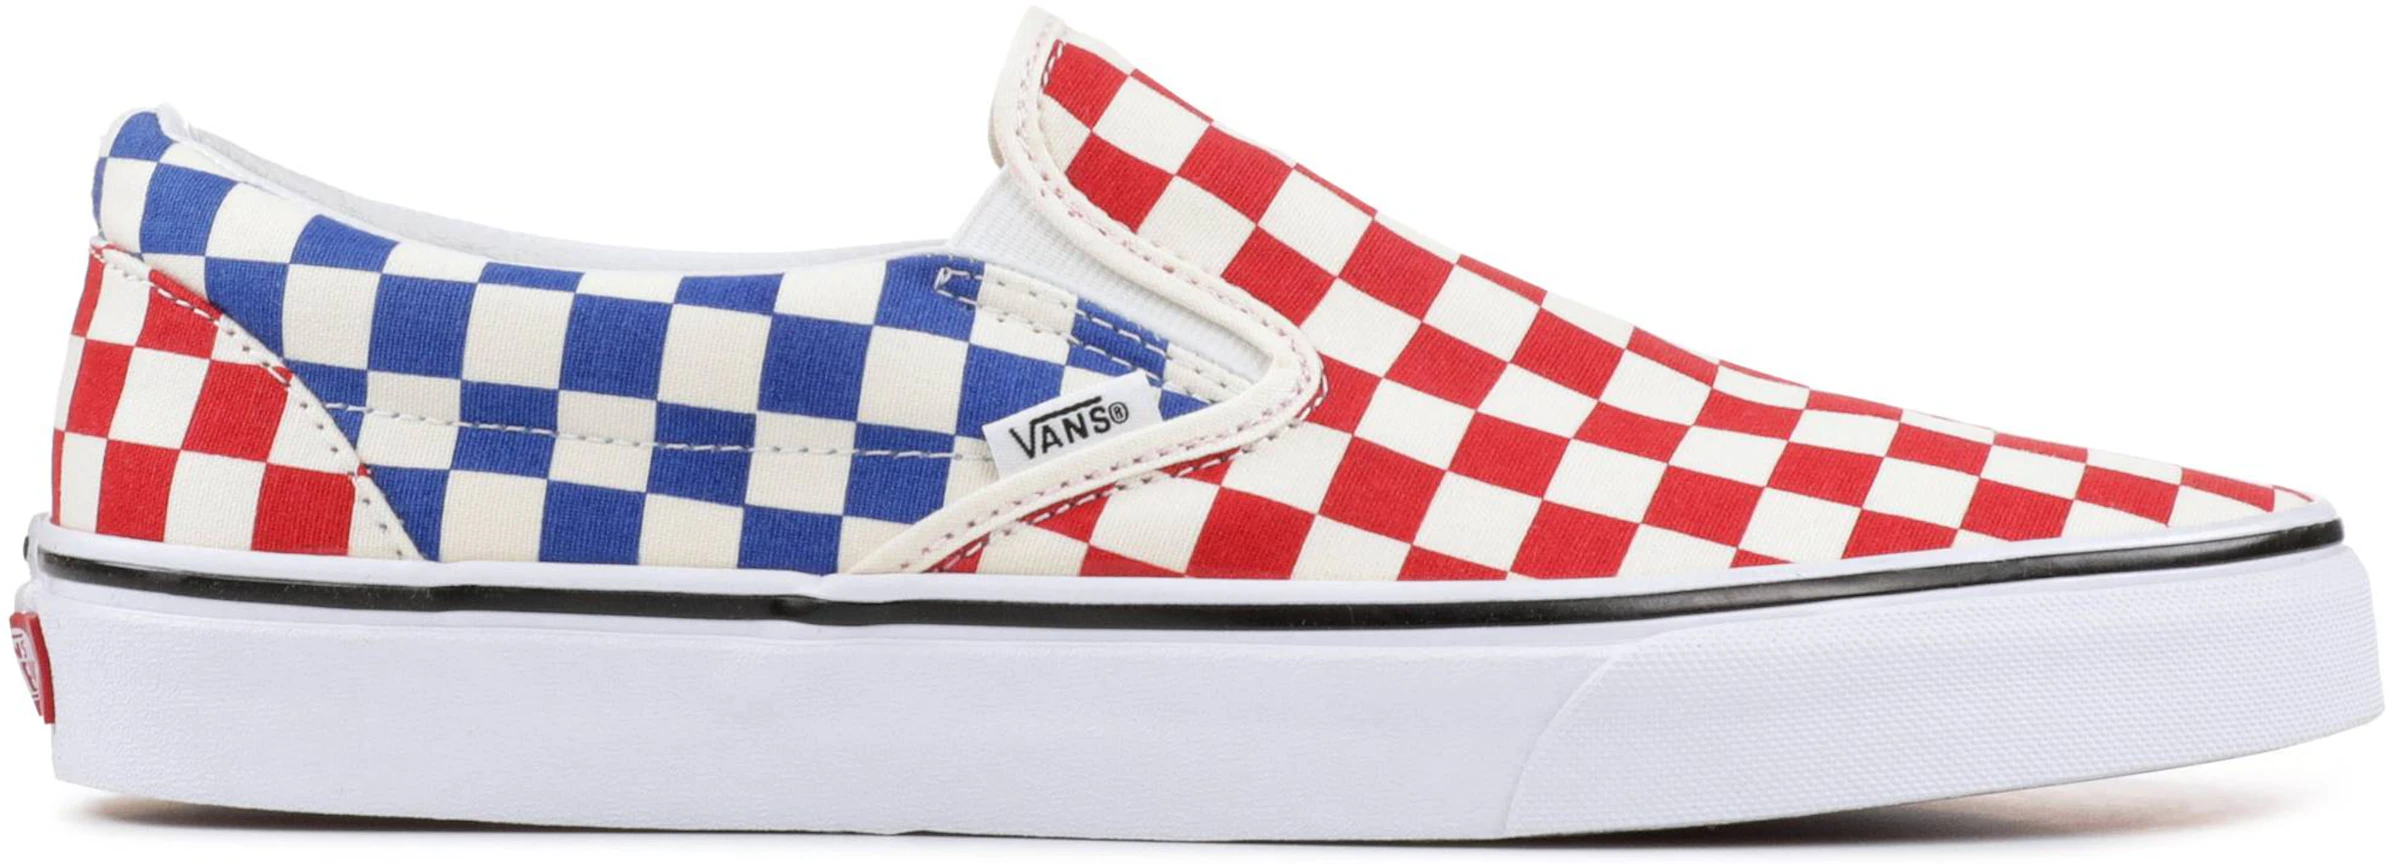 Vans Checkerboard Blue Red | peacecommission.kdsg.gov.ng